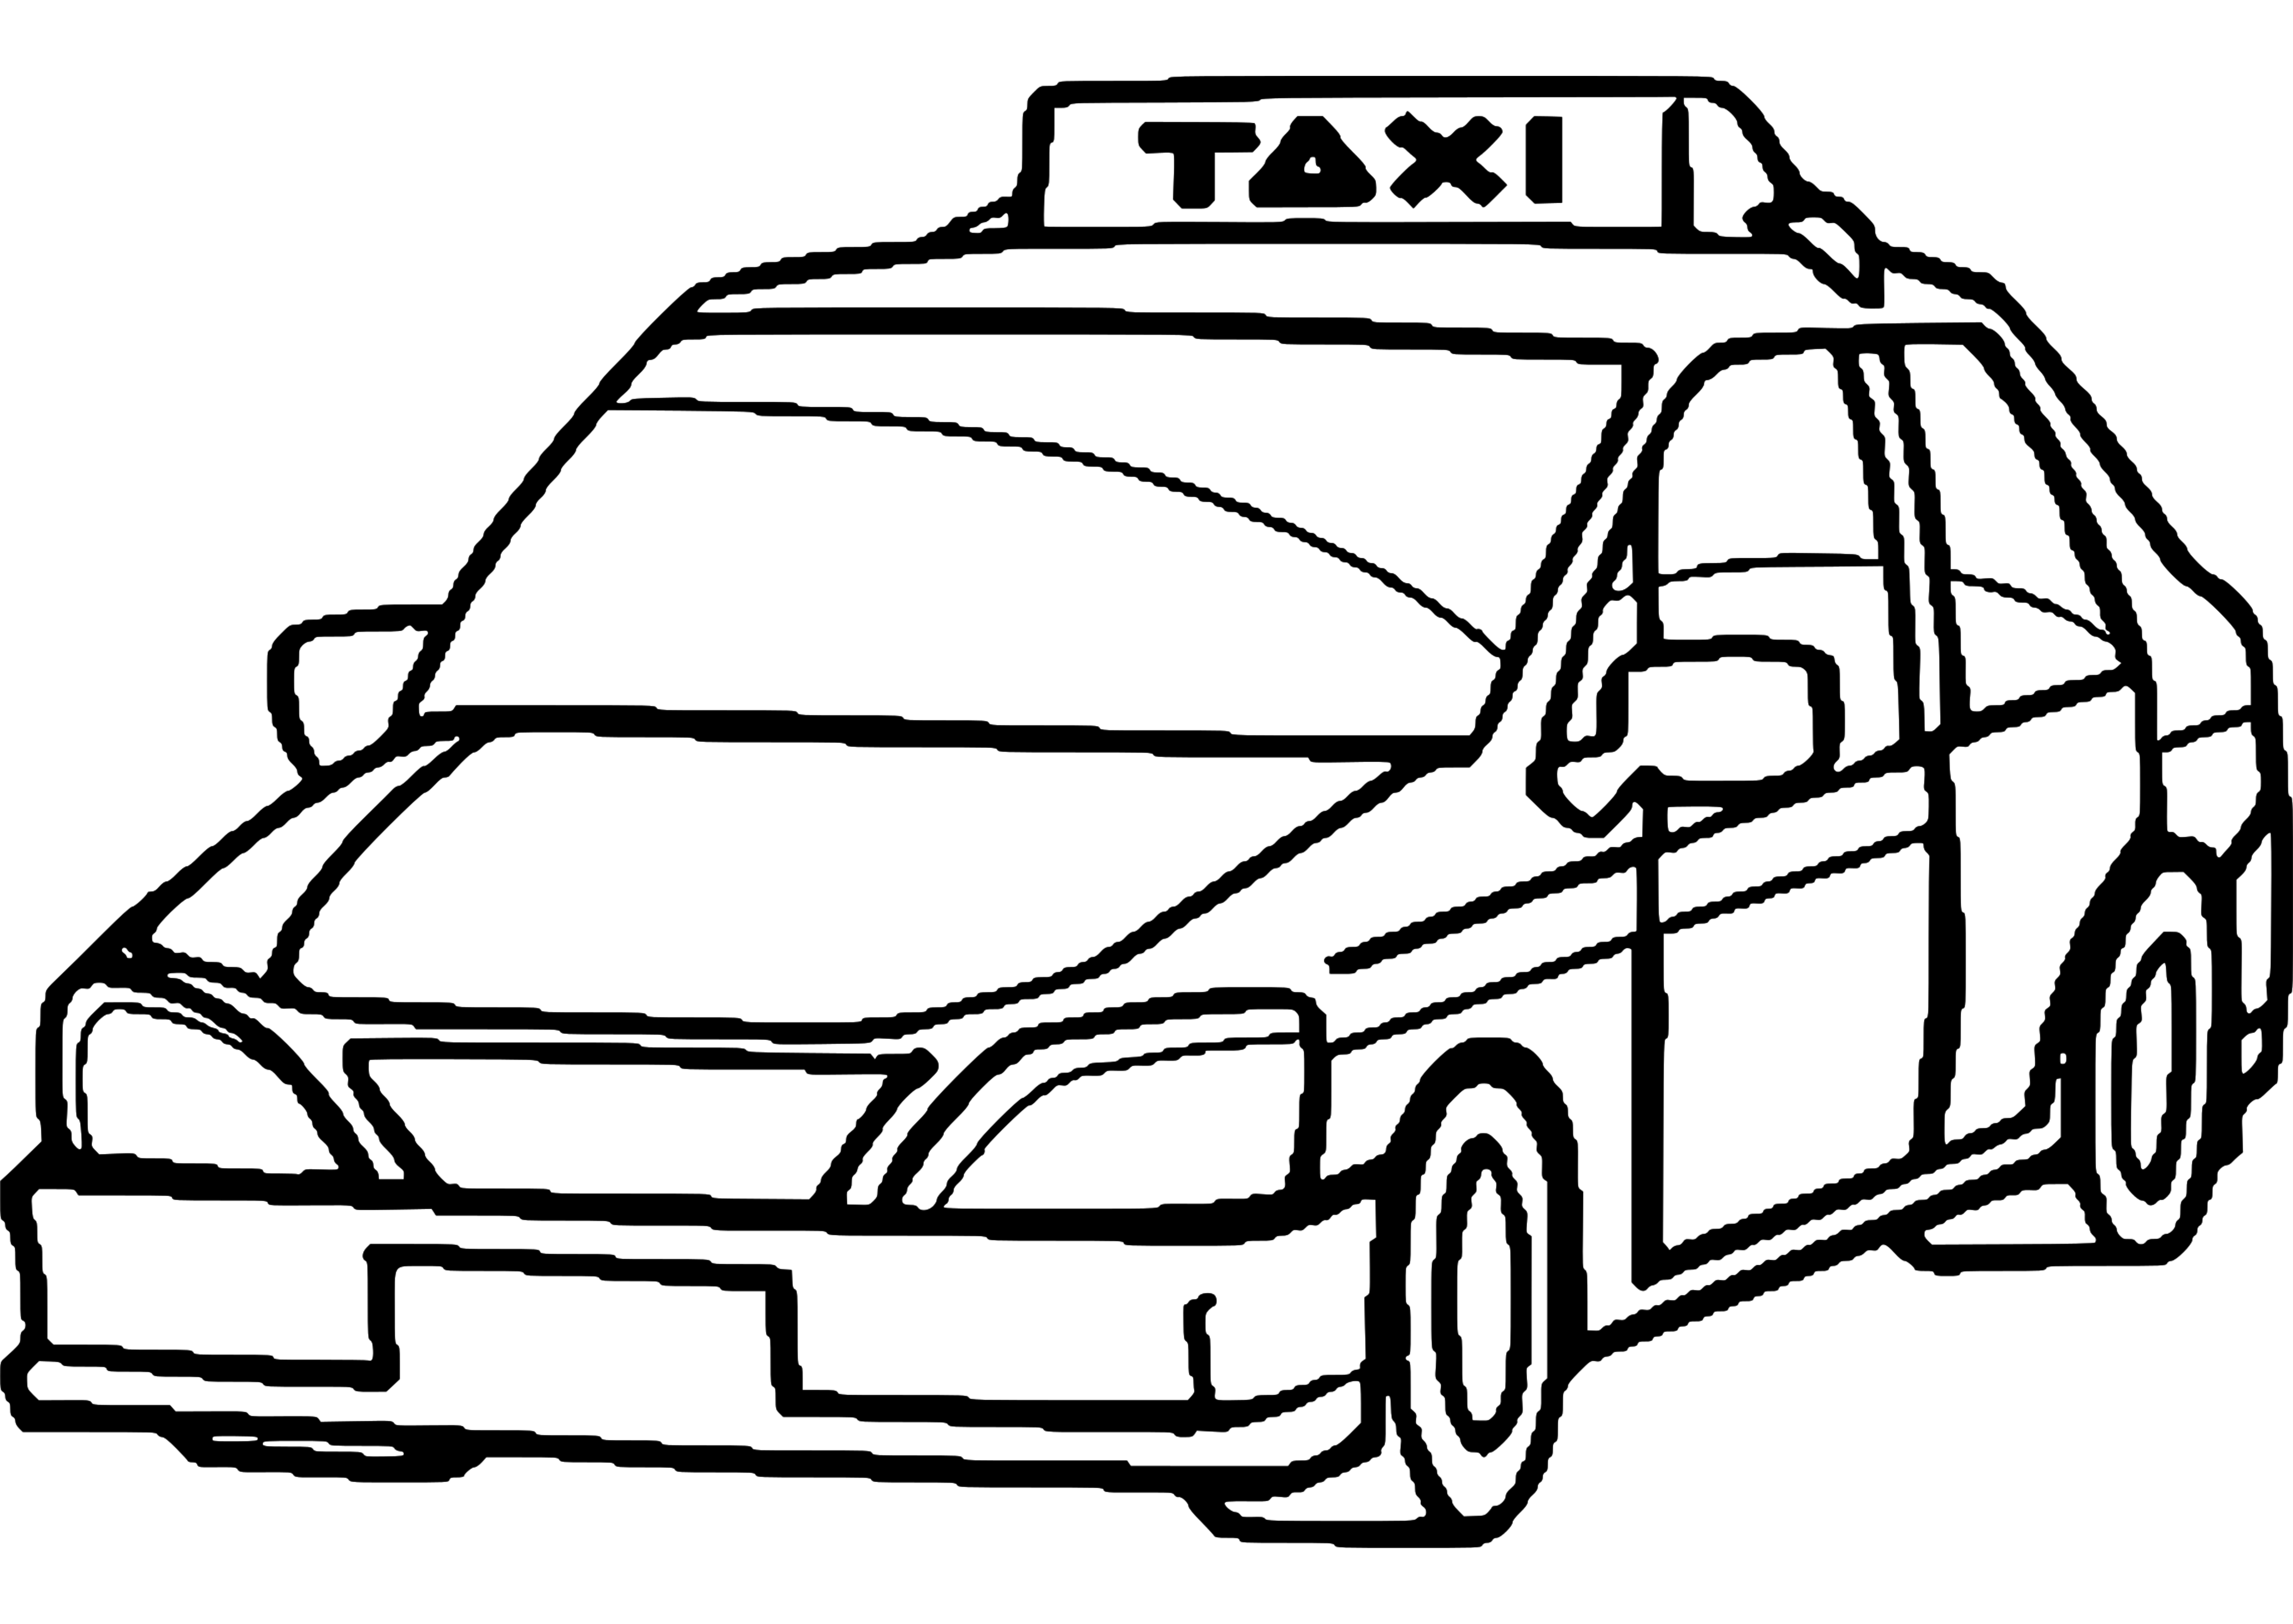 Taxi #18 (Transportation) – Printable coloring pages